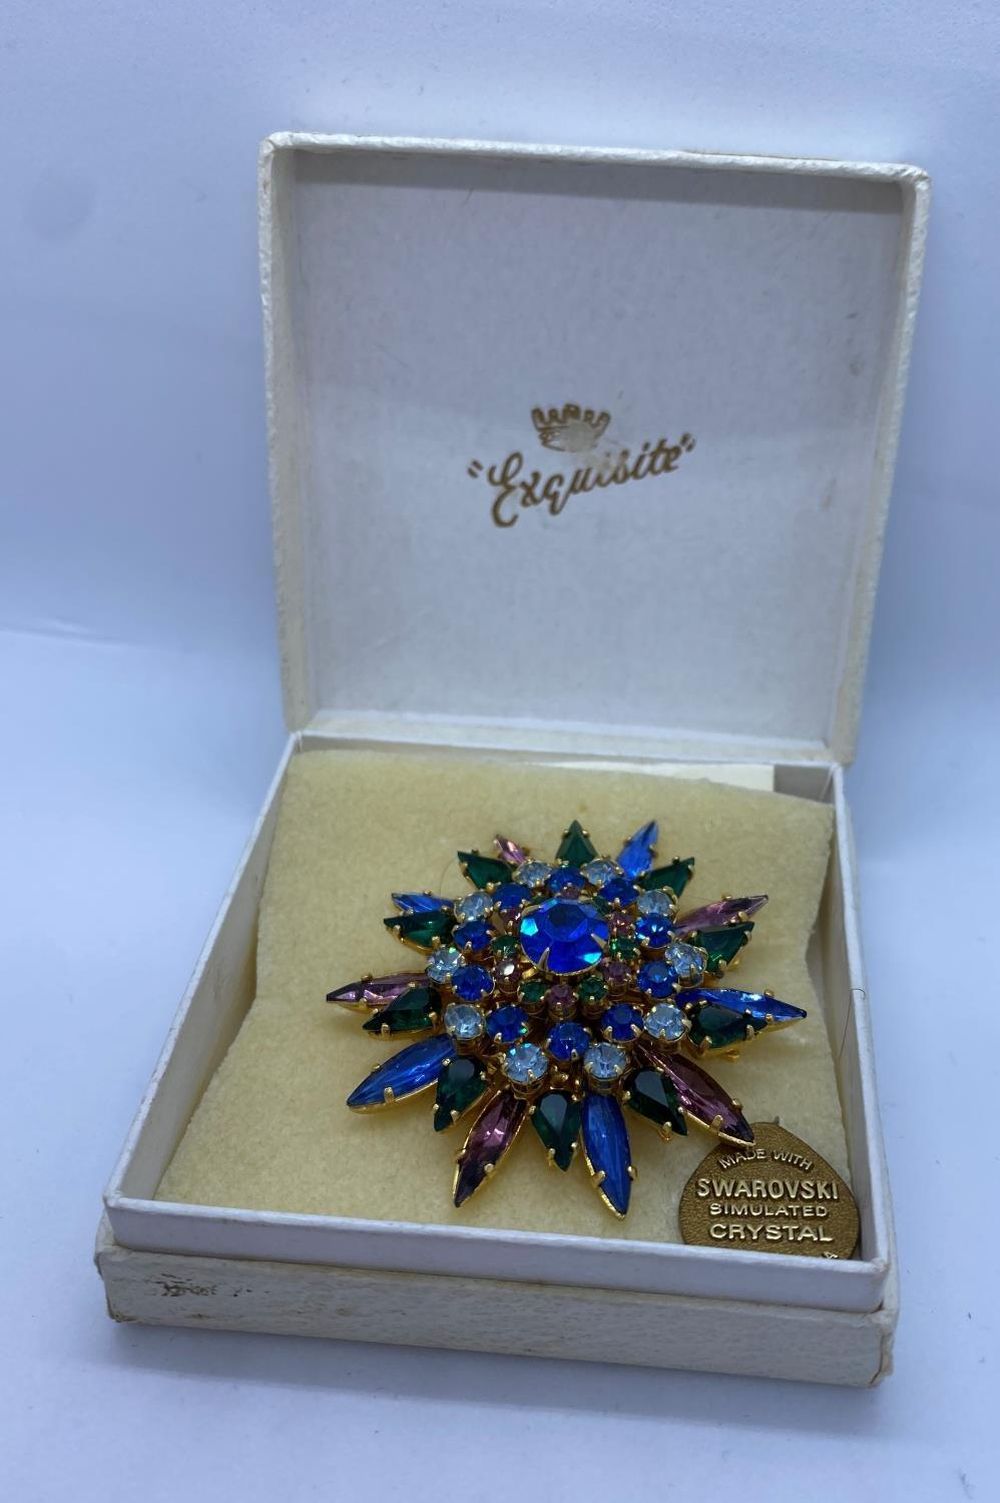 Swarovski Brooch with Coloured Stones and Labelled 'Marine' 5x5cm approx. - Image 3 of 3